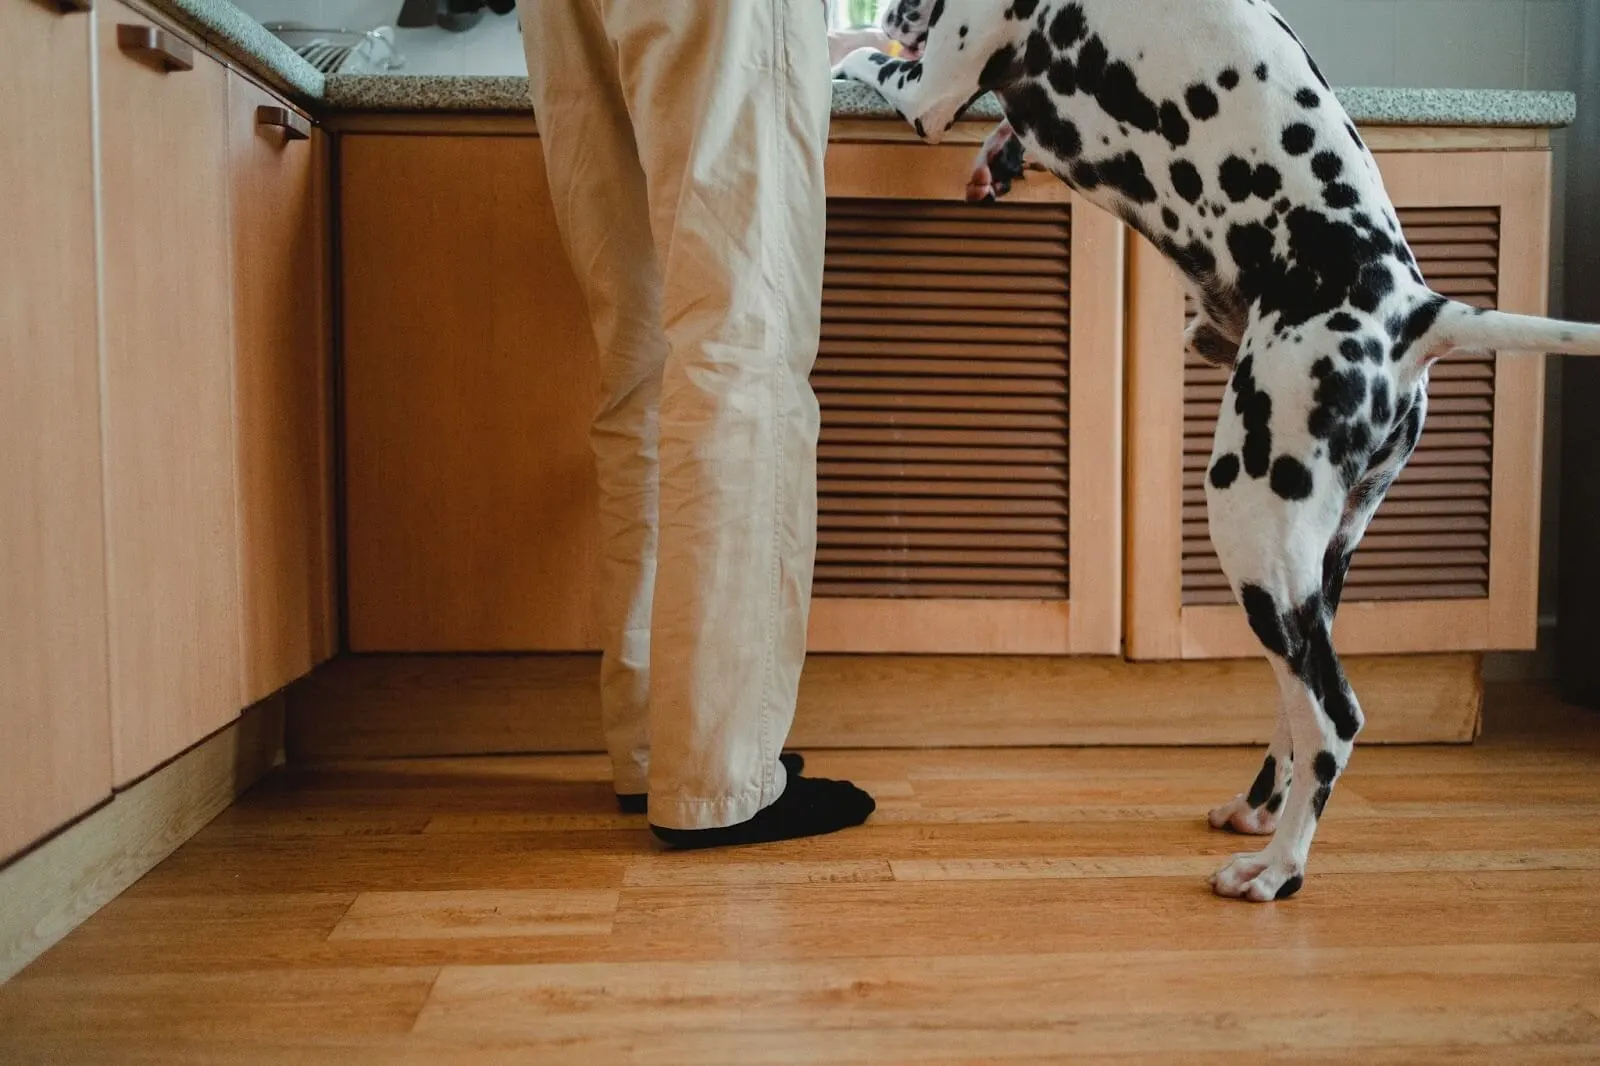 Dalmatian jumping up on owner